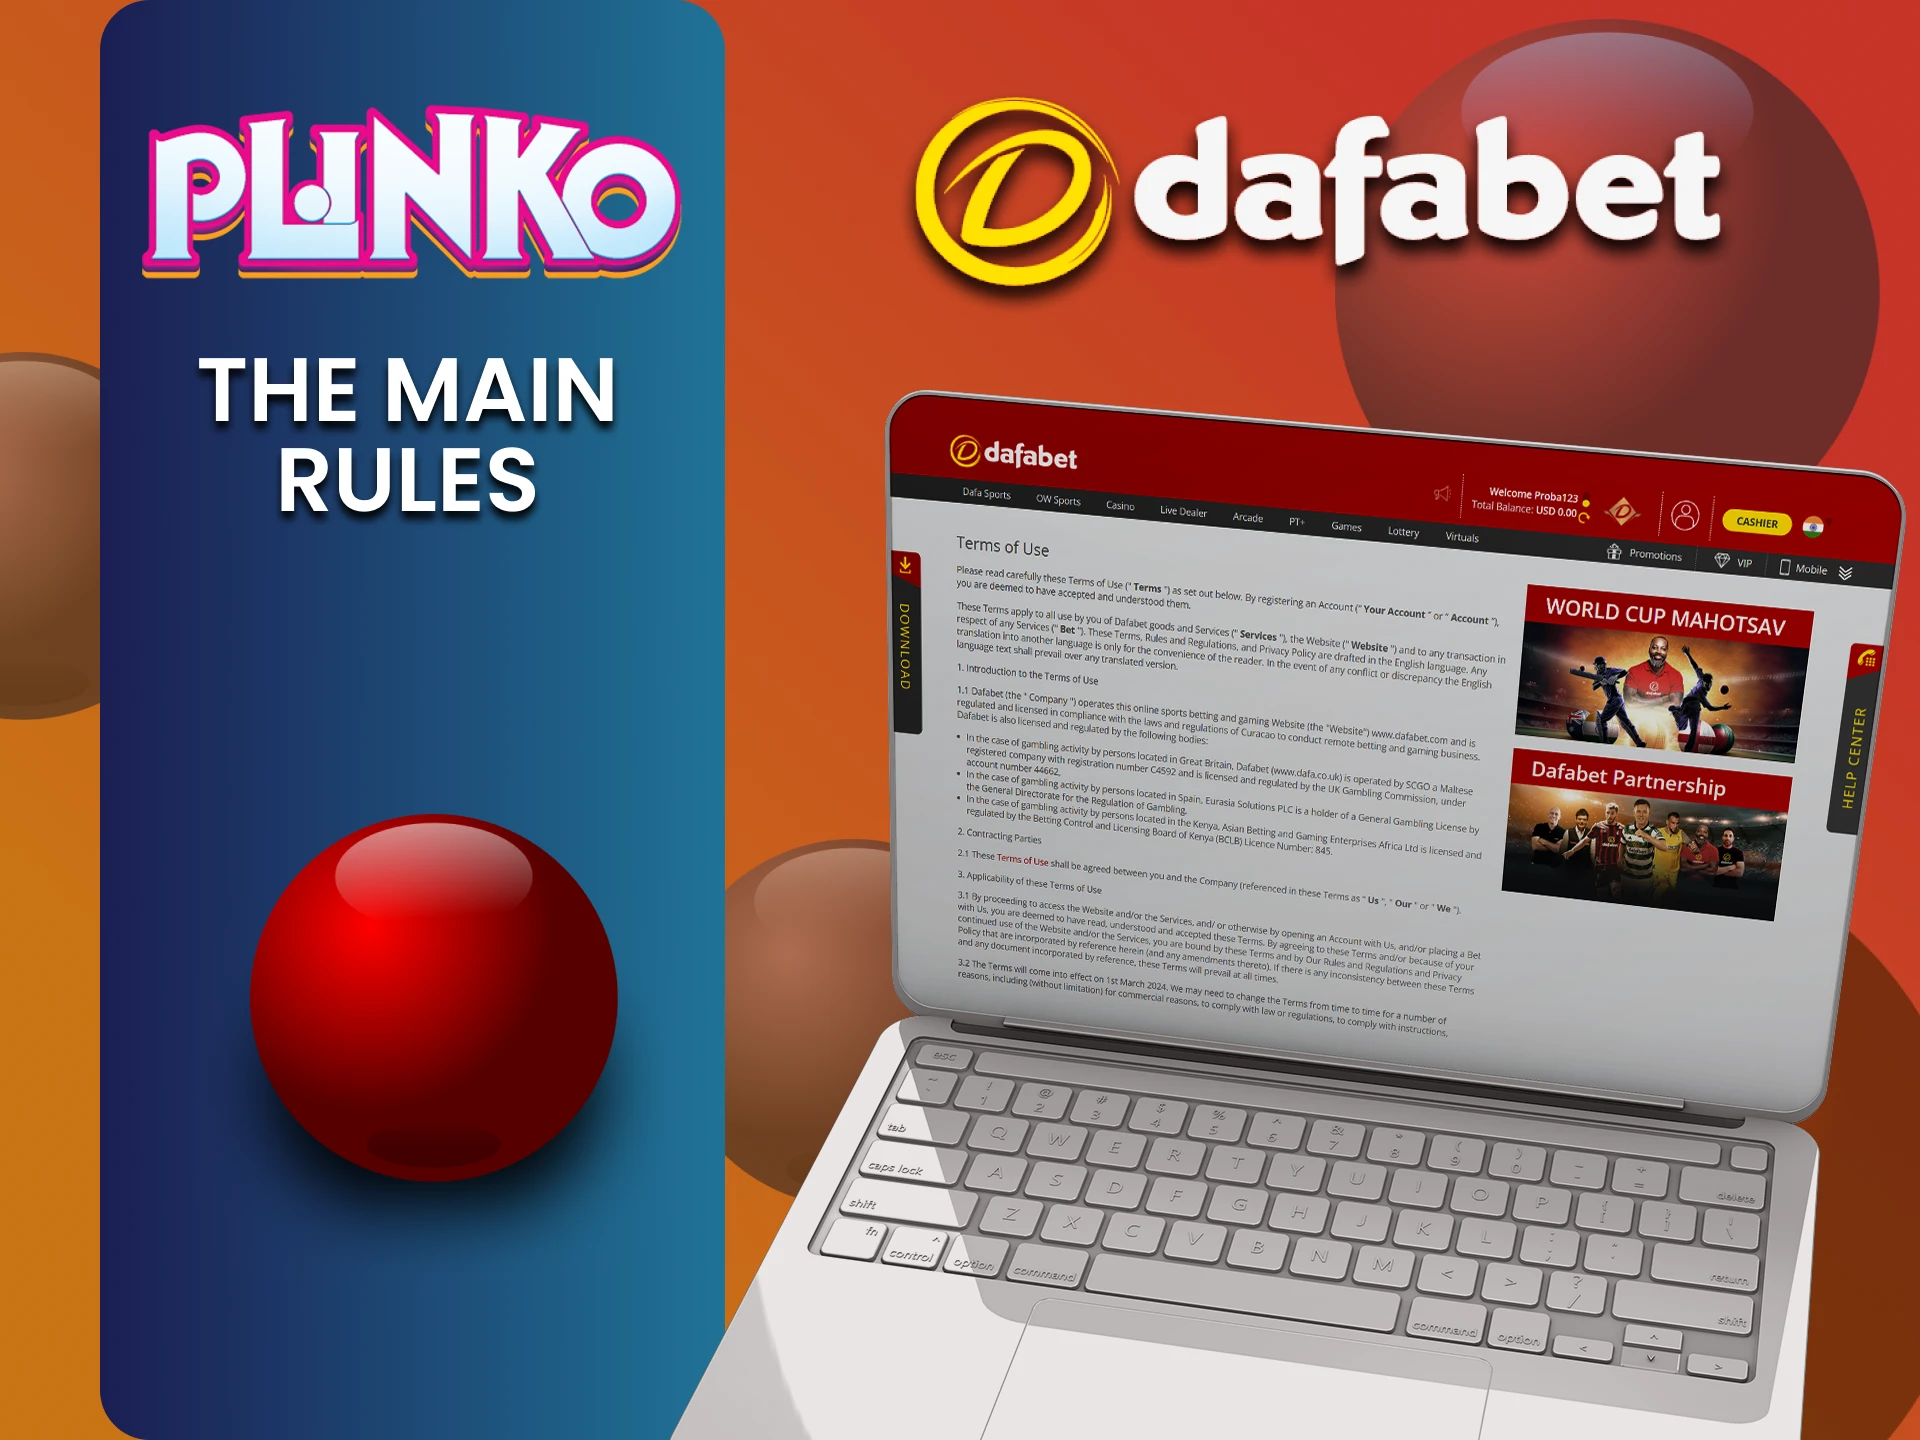 Learn the rules for using the Dafabet website for the game Plinko.